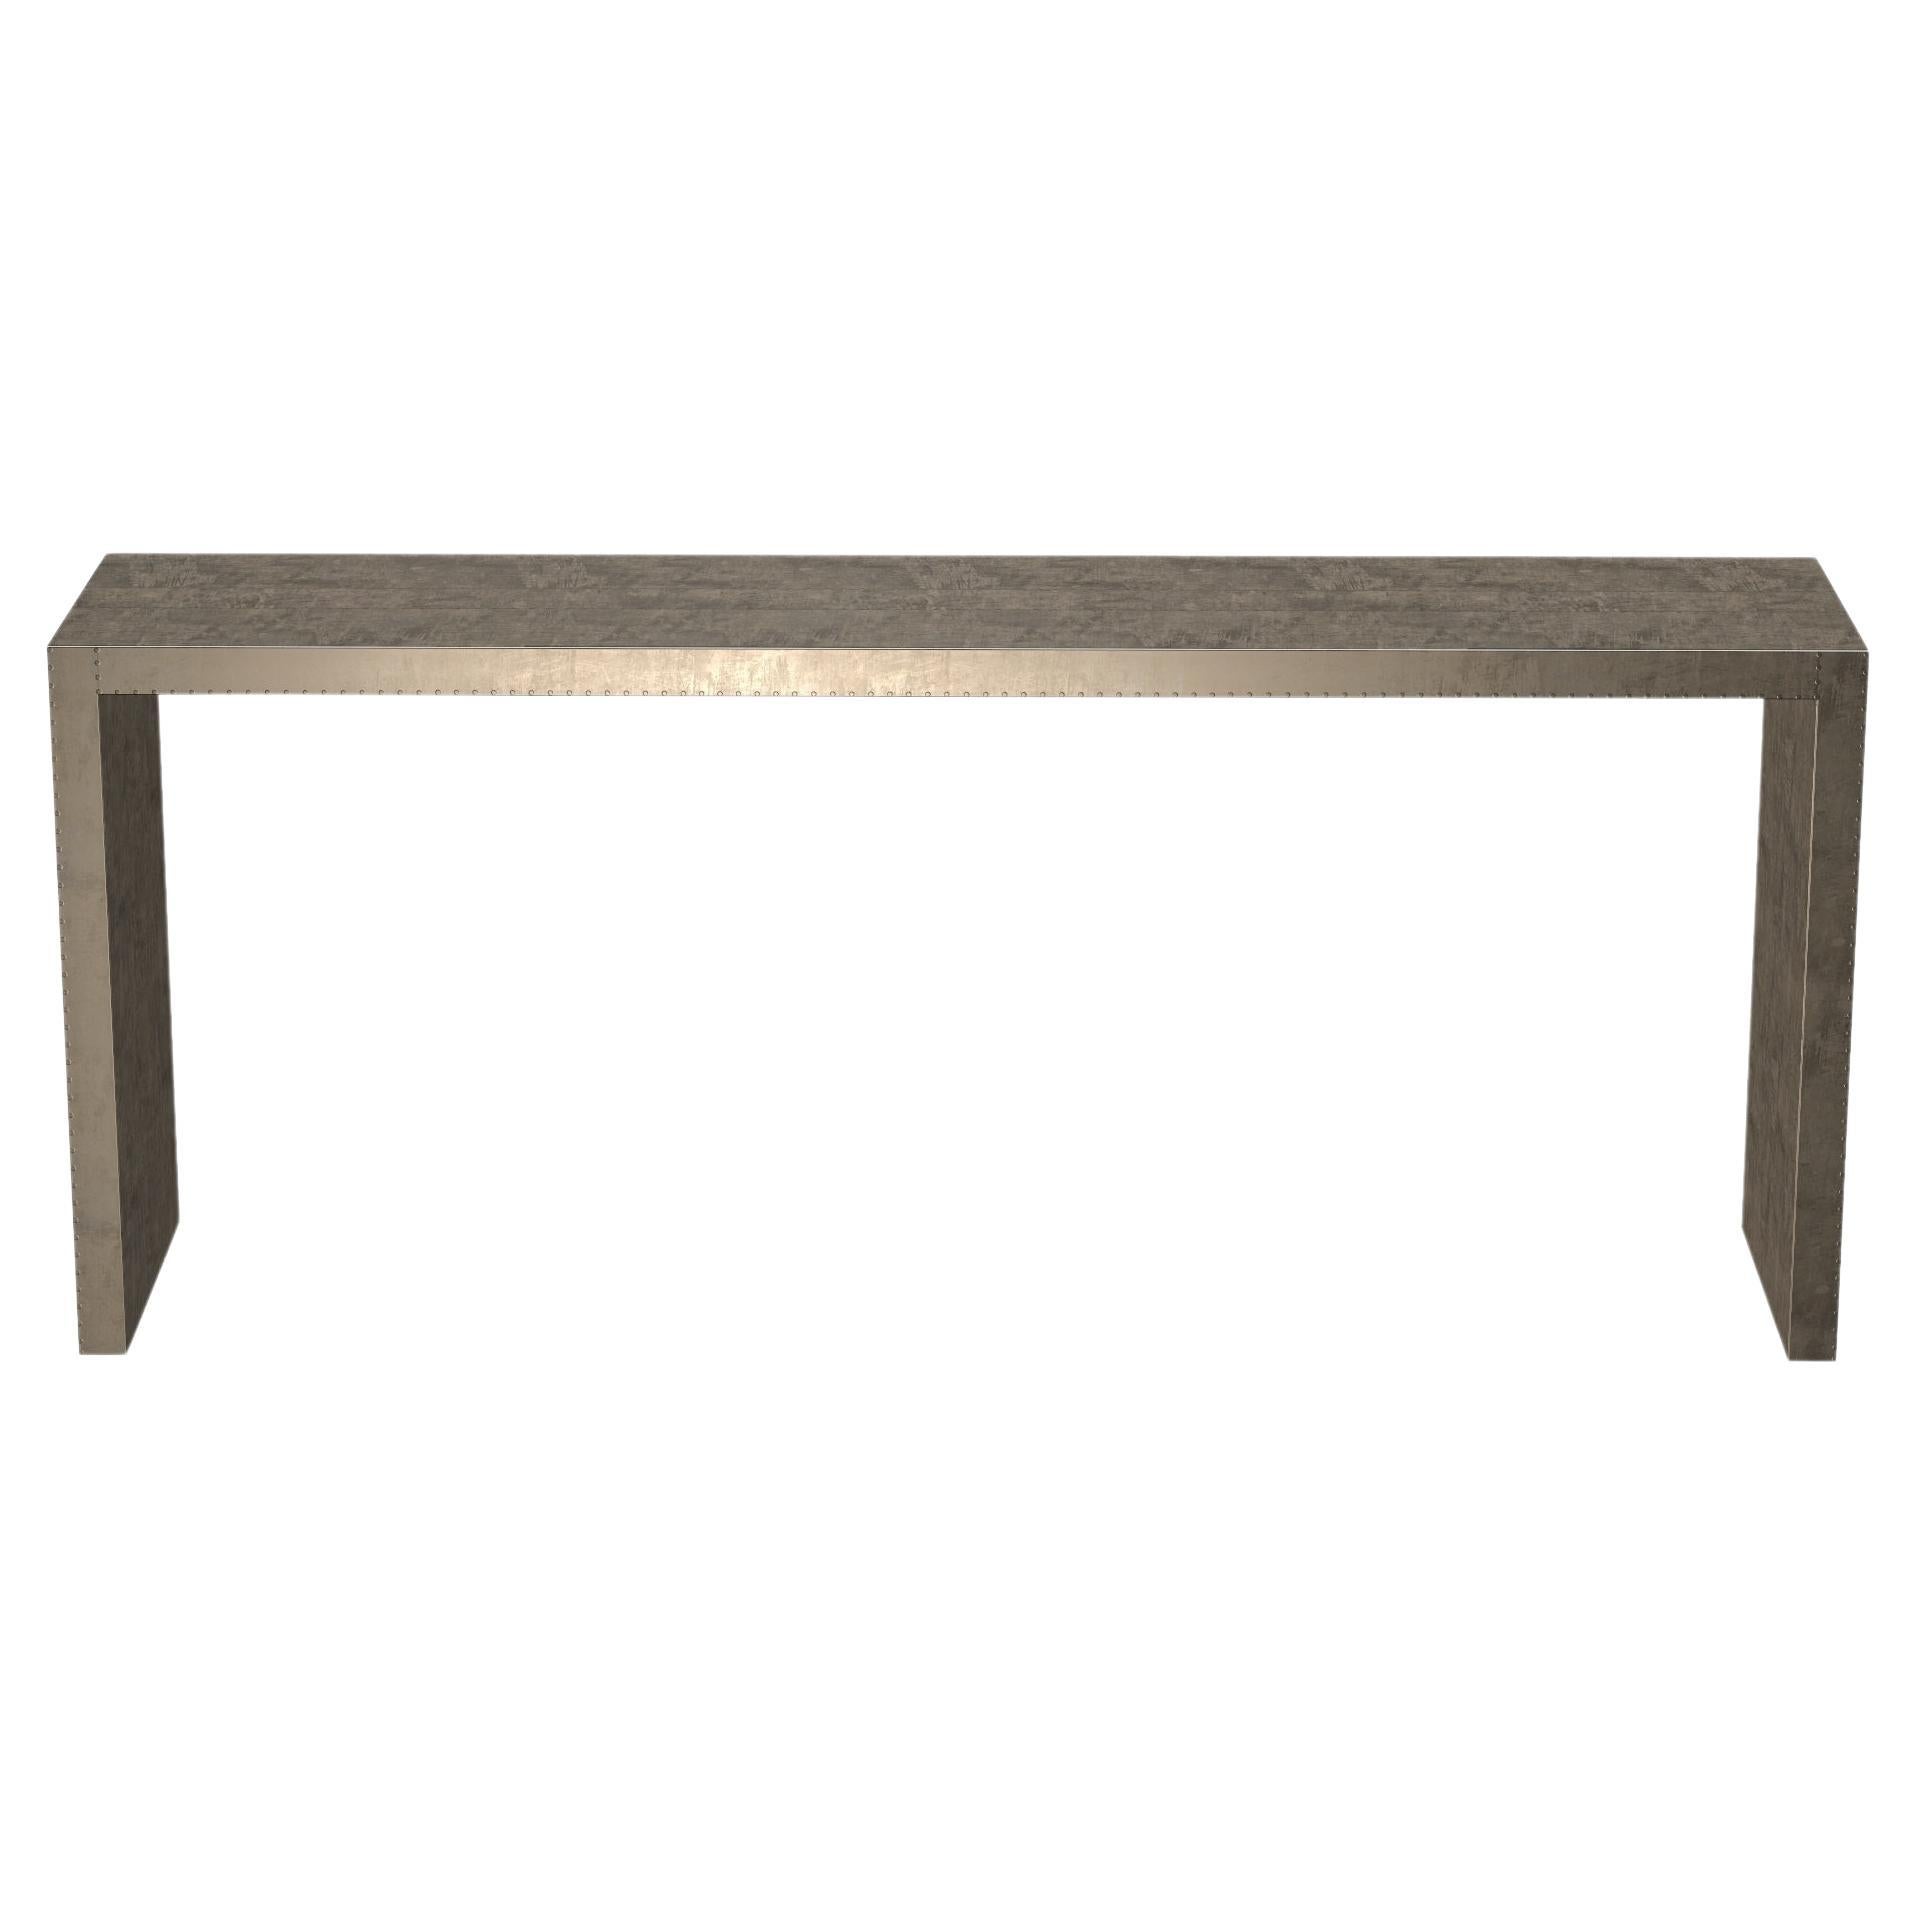 Art Deco Game Console Tables in Smooth Antique Bronze by Alison Spear For Sale